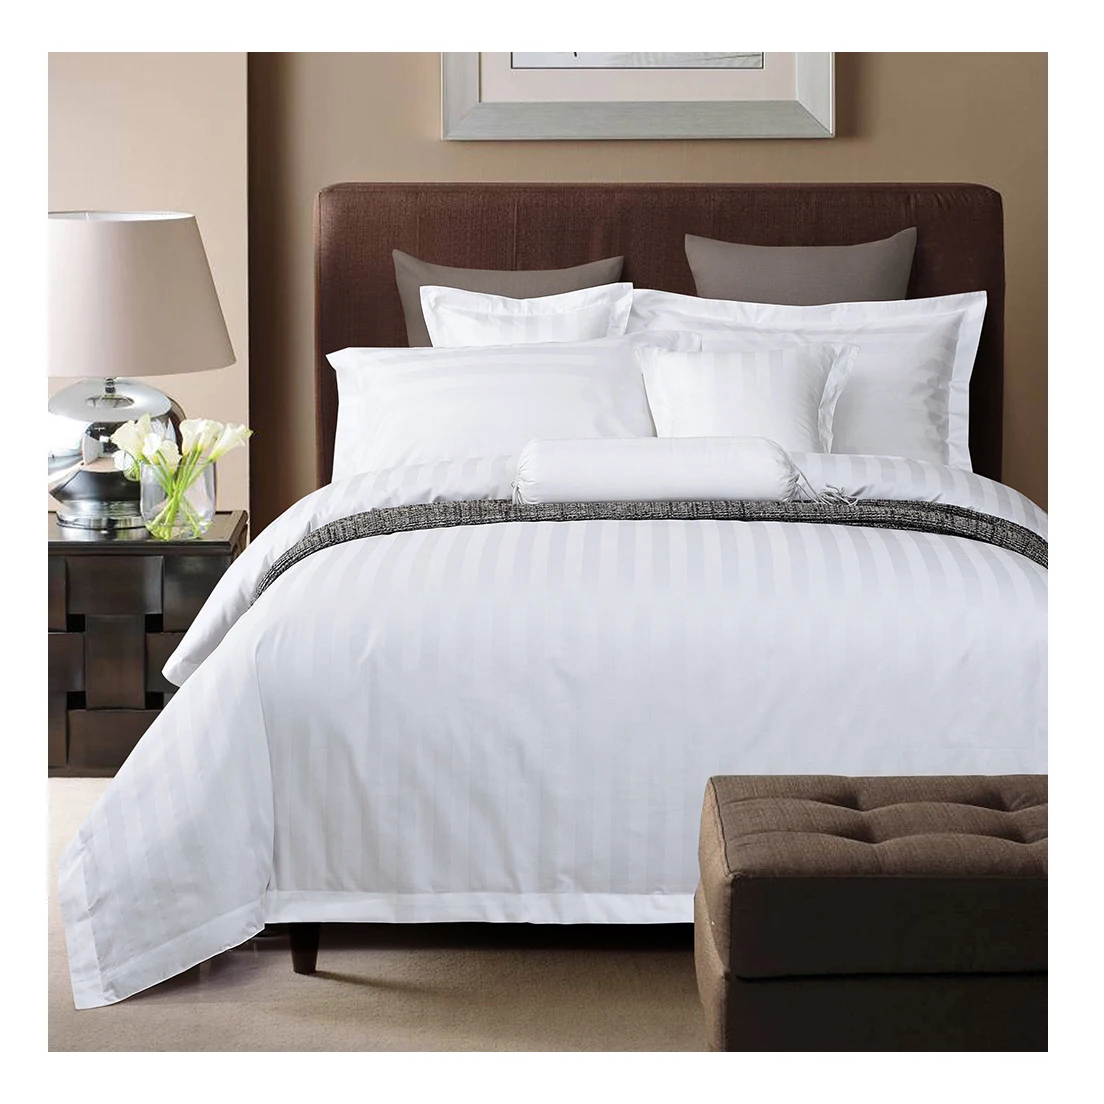 King size White Cotton fabric hotel linen 300 thread count cotton bedsheet bedsheet with comforter for hotel